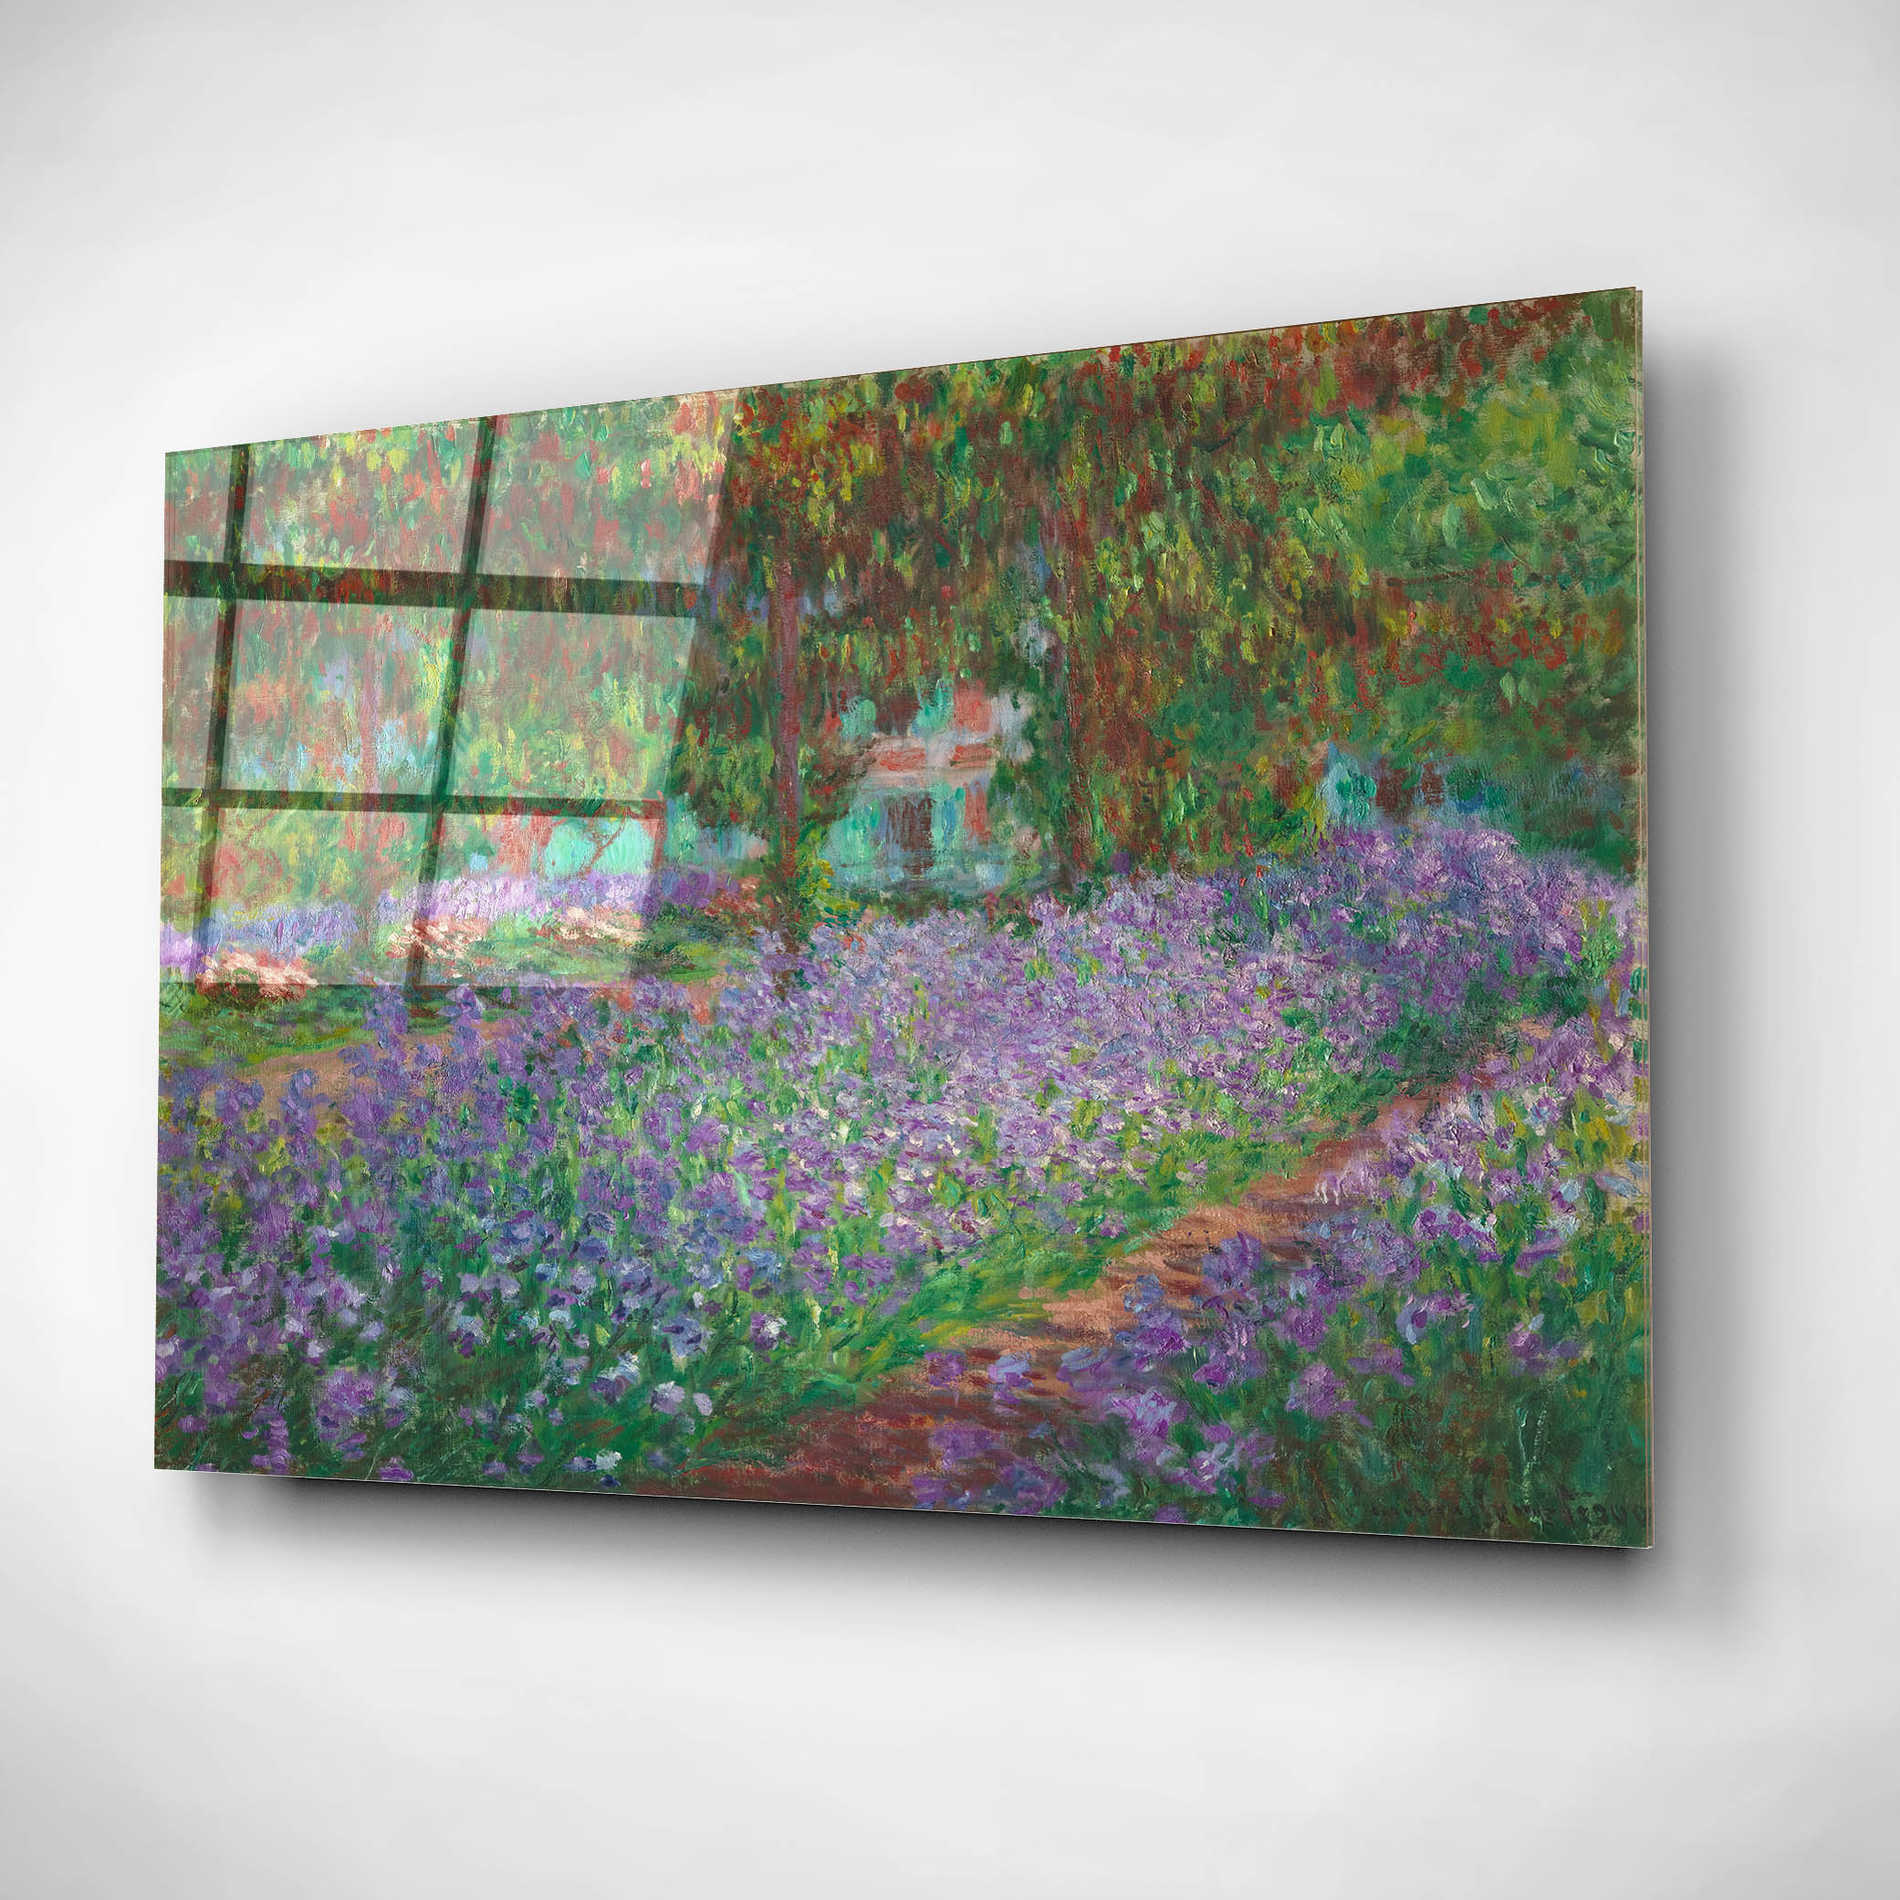 Epic Art 'The Artist's Garden at Giverny' by Claude Monet, Acrylic Glass Wall Art,16x12